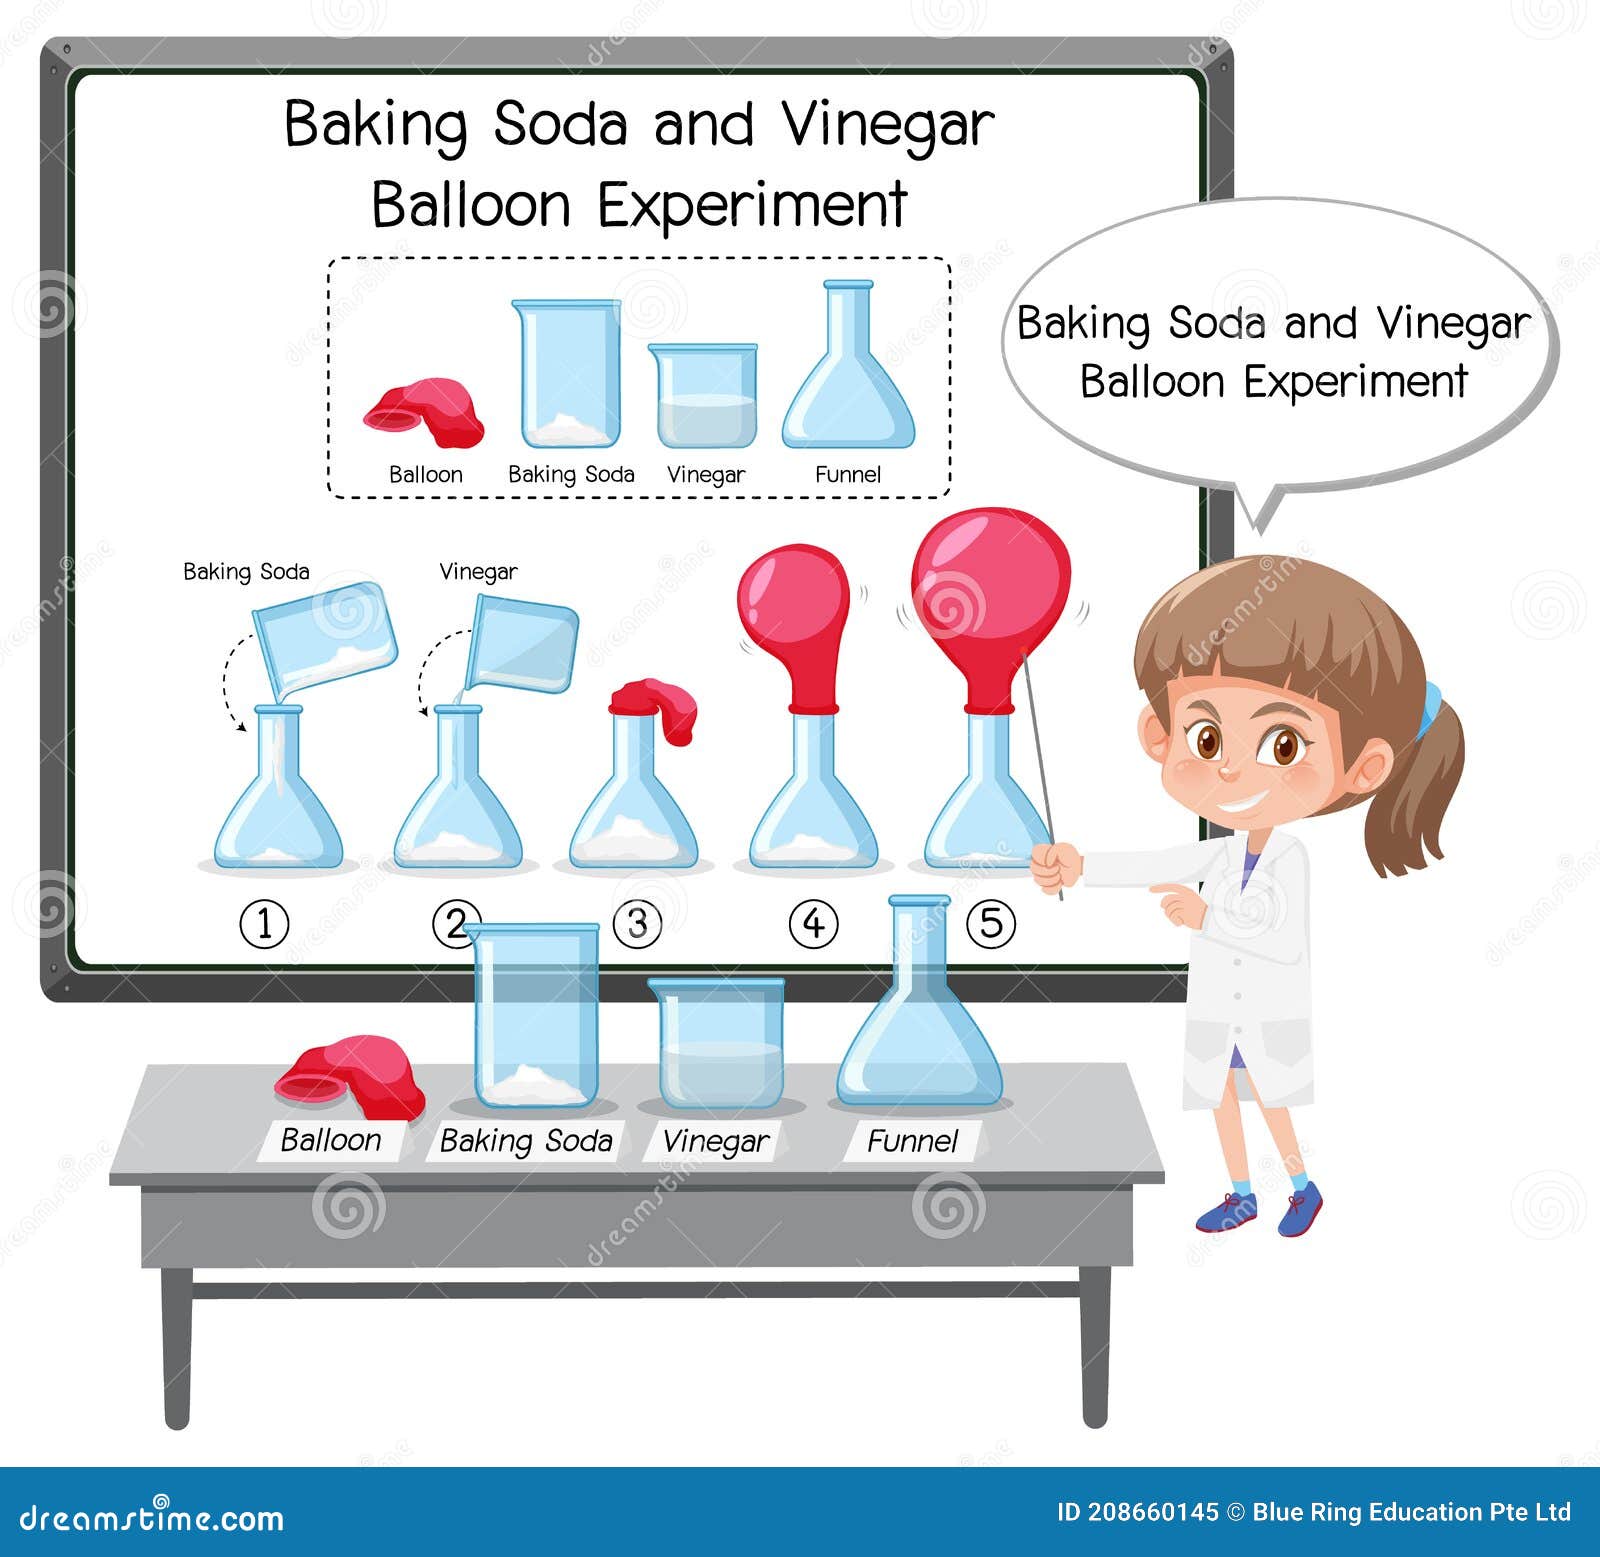 hypothesis of vinegar and baking soda experiment